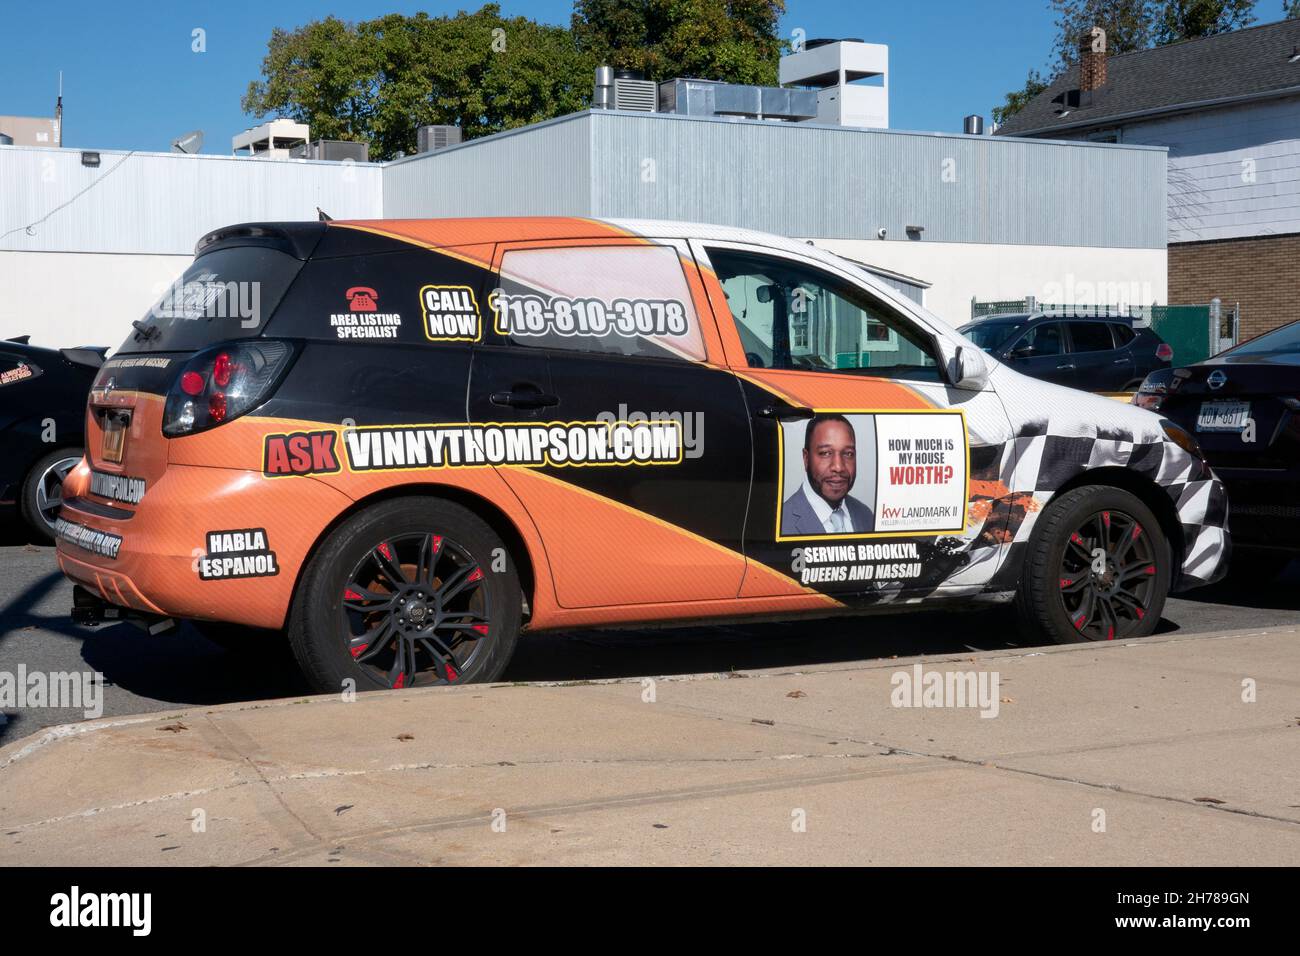 A car with advertisements for a bilingual real estate agent with his own website. Parked in Flushing, Queens, New York Stock Photo